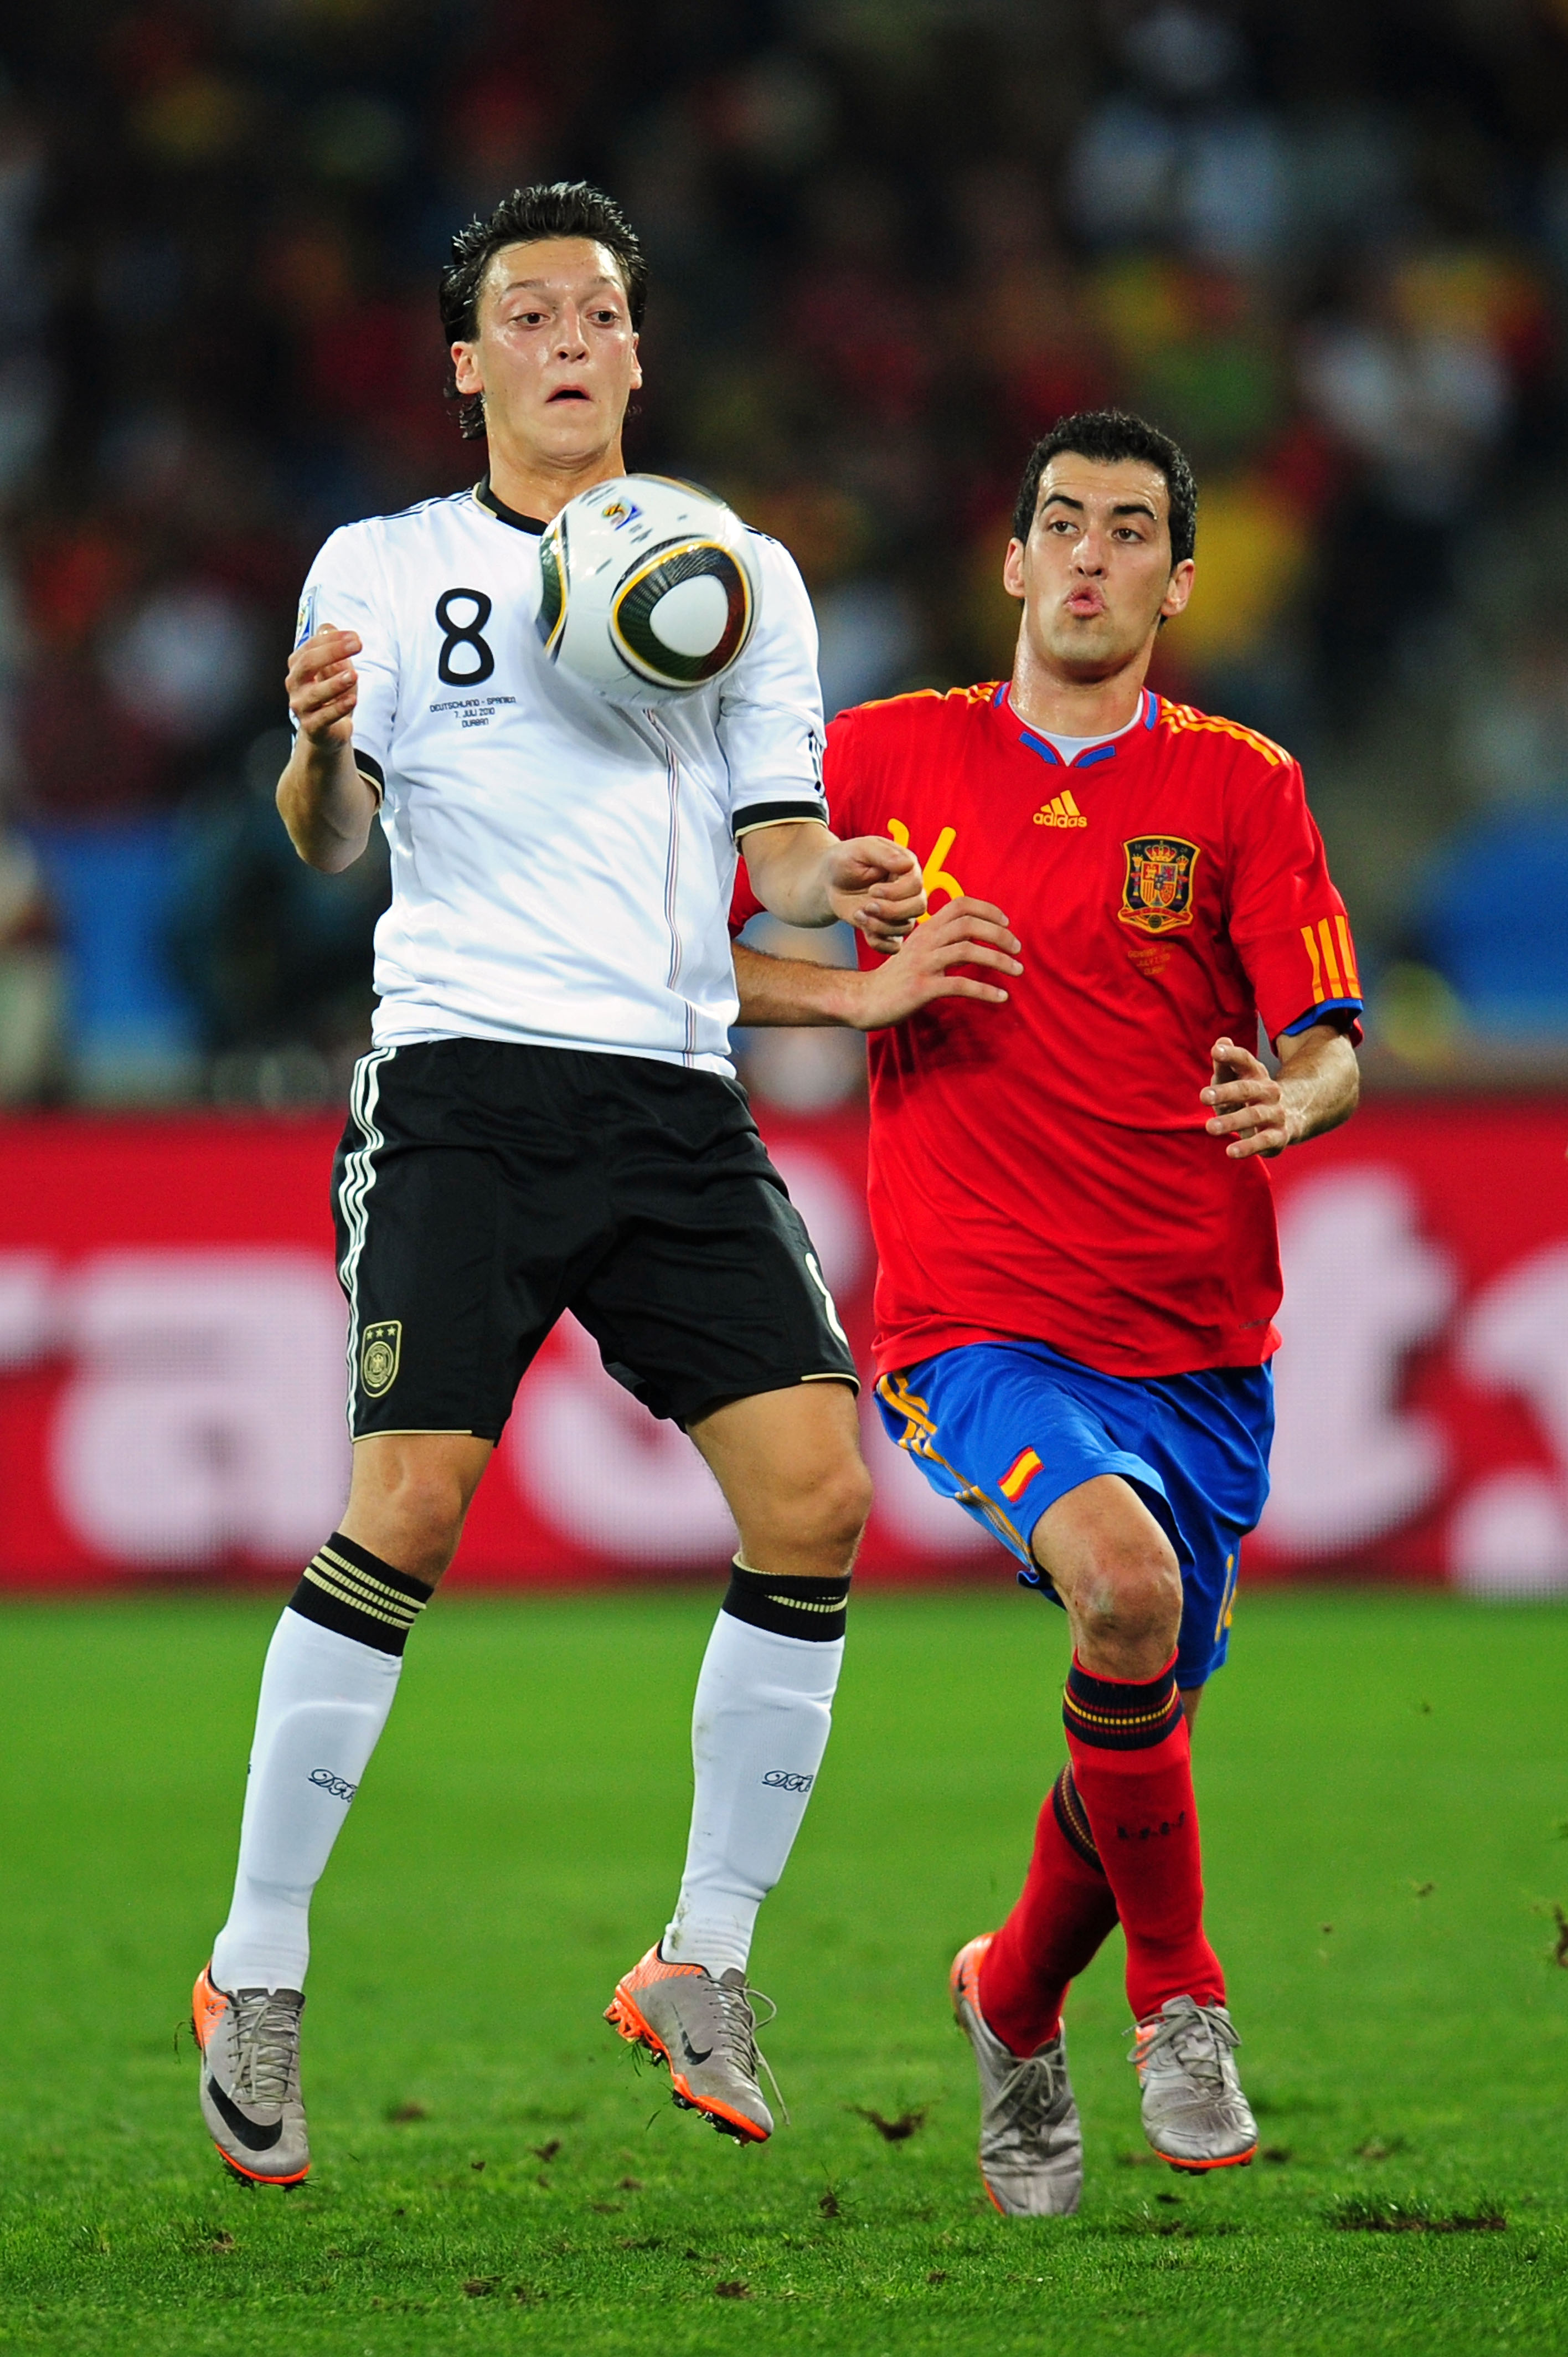 DURBAN, SOUTH AFRICA - JULY 07:  Mesut Oezil of Germany controls the ball on his chest as he is closed down by Sergio Busquets of Spain during the 2010 FIFA World Cup South Africa Semi Final match between Germany and Spain at Durban Stadium on July 7, 201